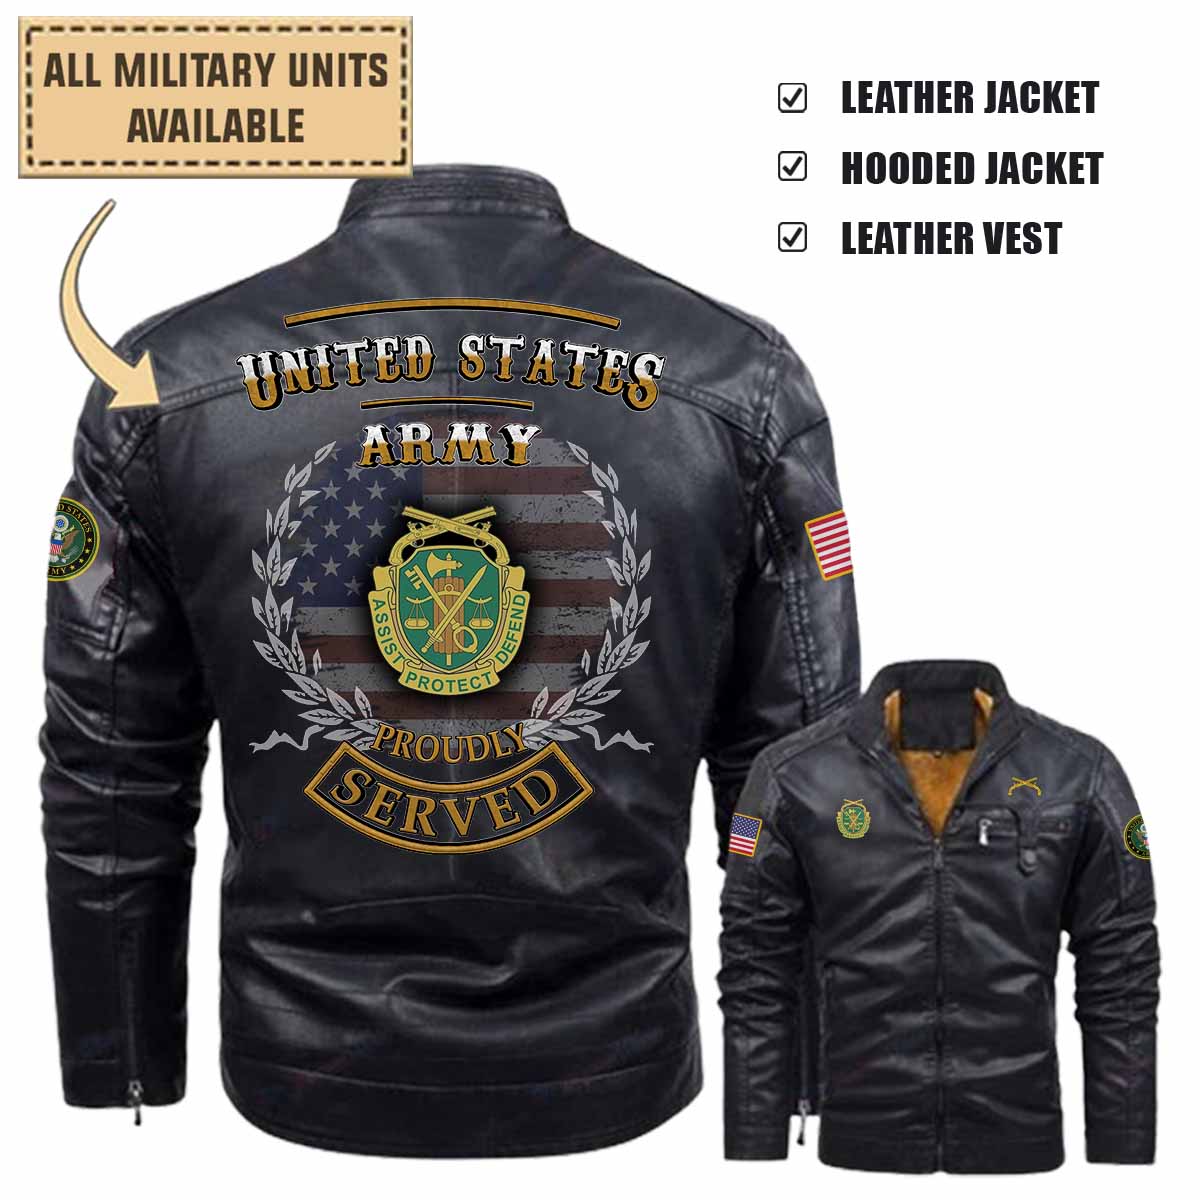 558th MP CO 558th Military Police Company_Military Leather Jacket and Vest